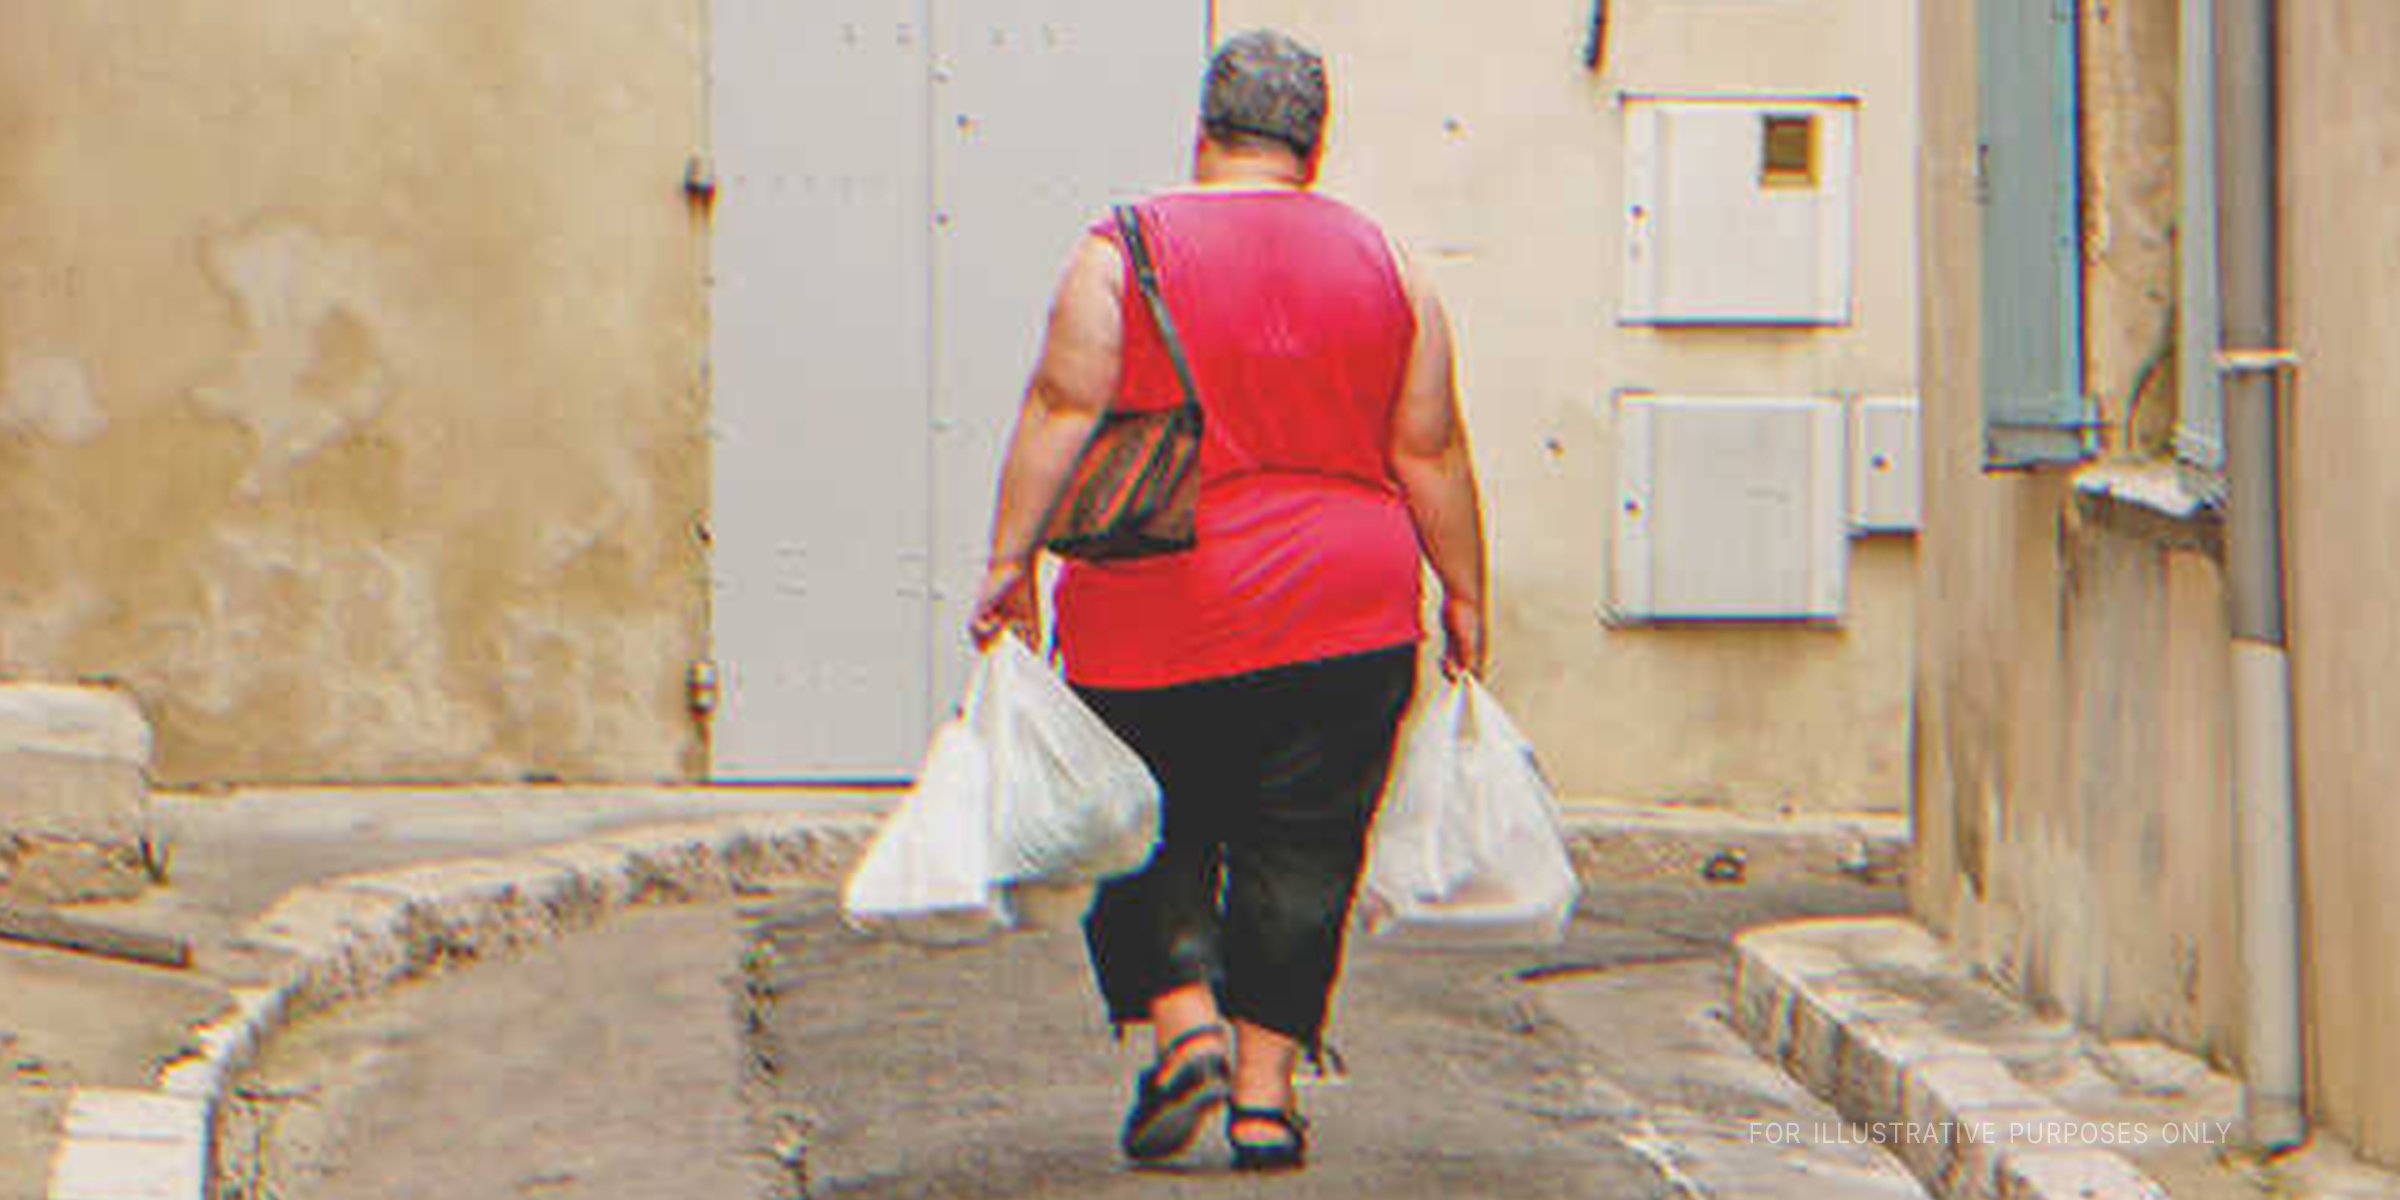 A woman carrying groceries. | Source: Shutterstock